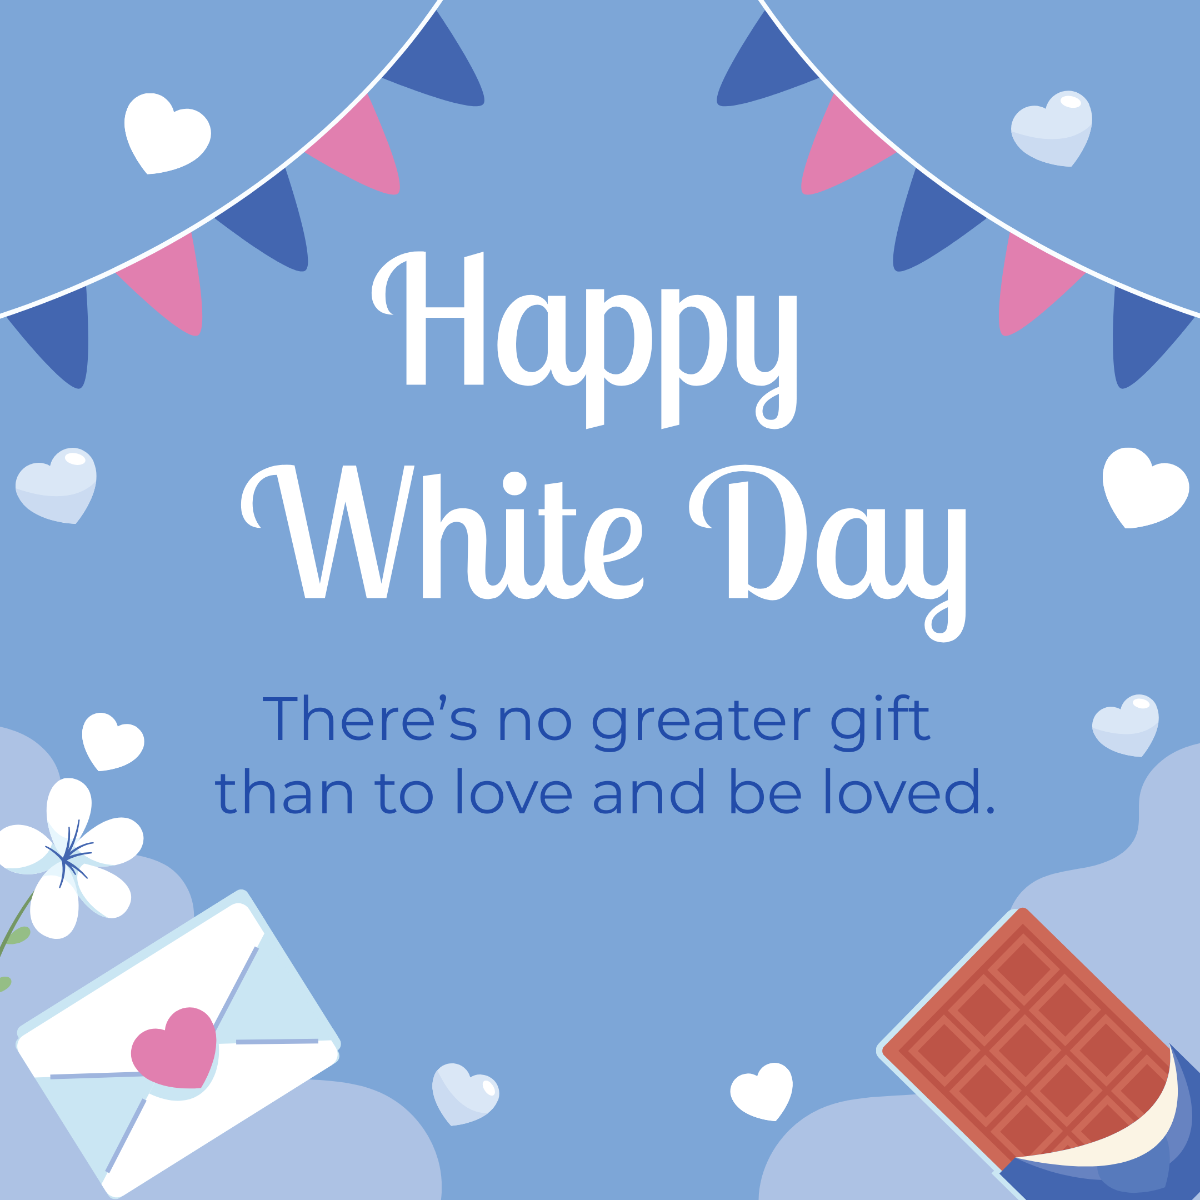  White Day Facebook Post Template